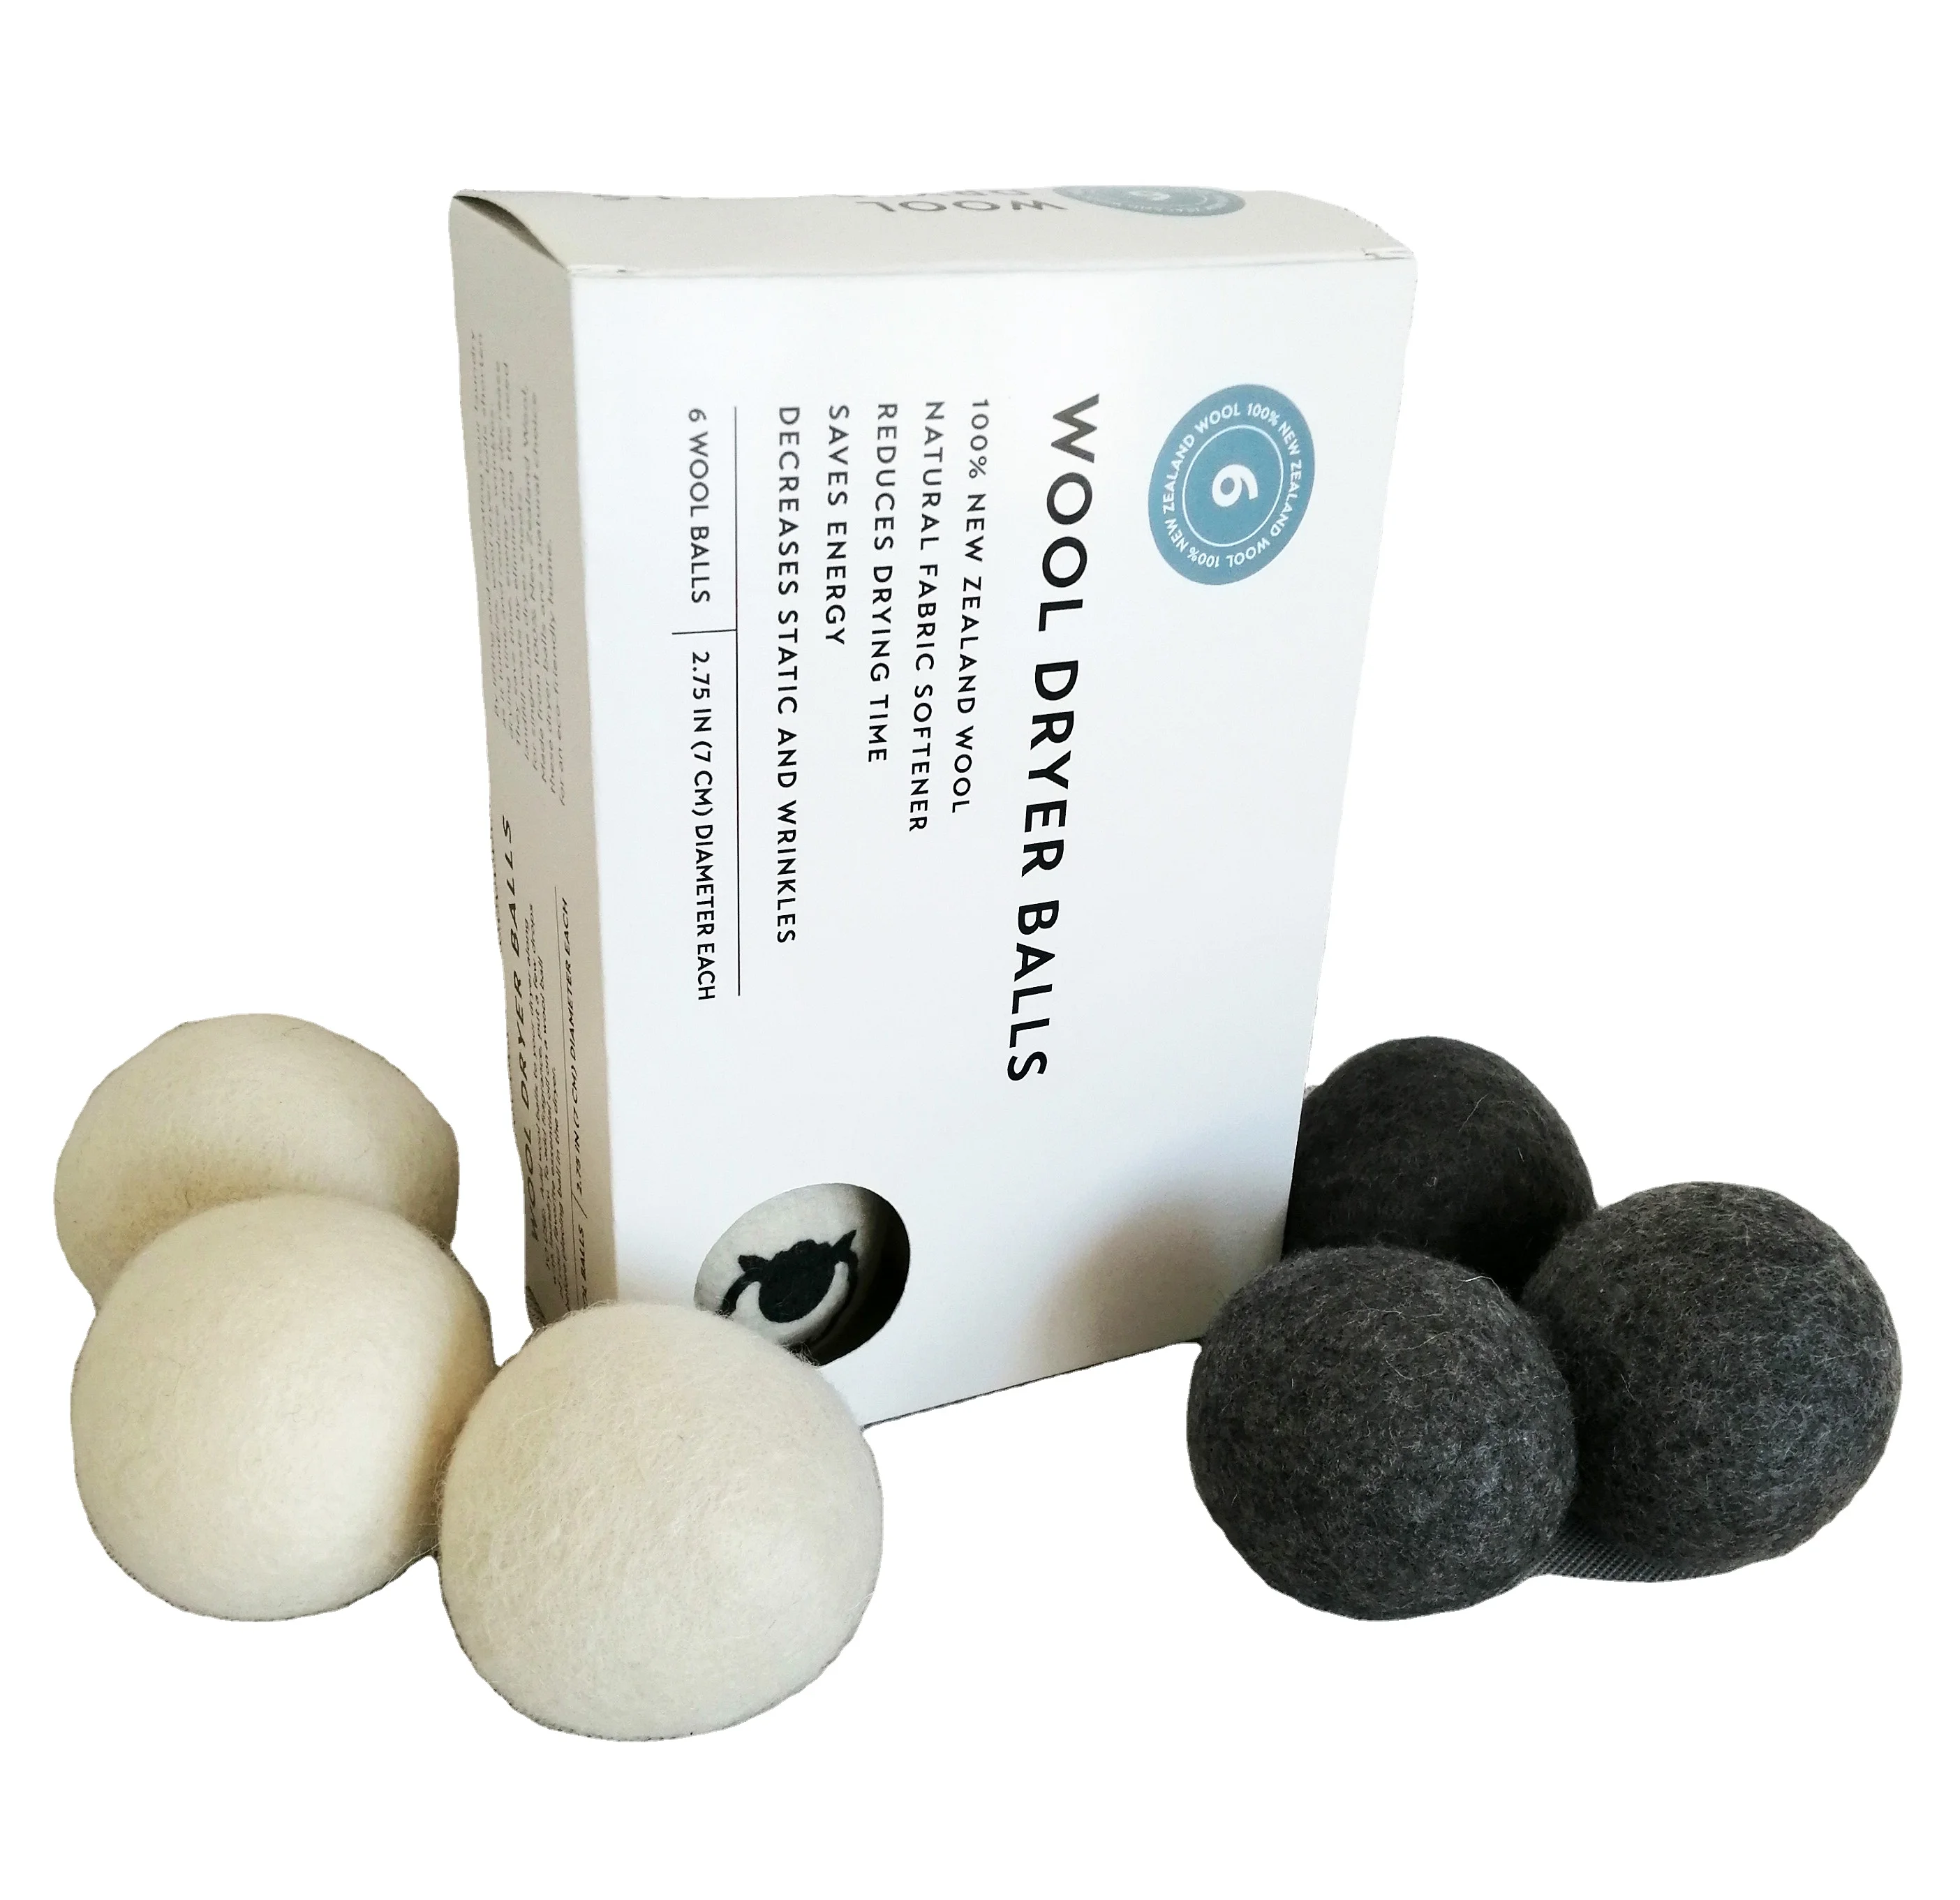 

New trends products 2021 new arrivals amazon new products pure organic XXL 9cm 80g New zealand wool dryer balls as seen on TV, Customized color